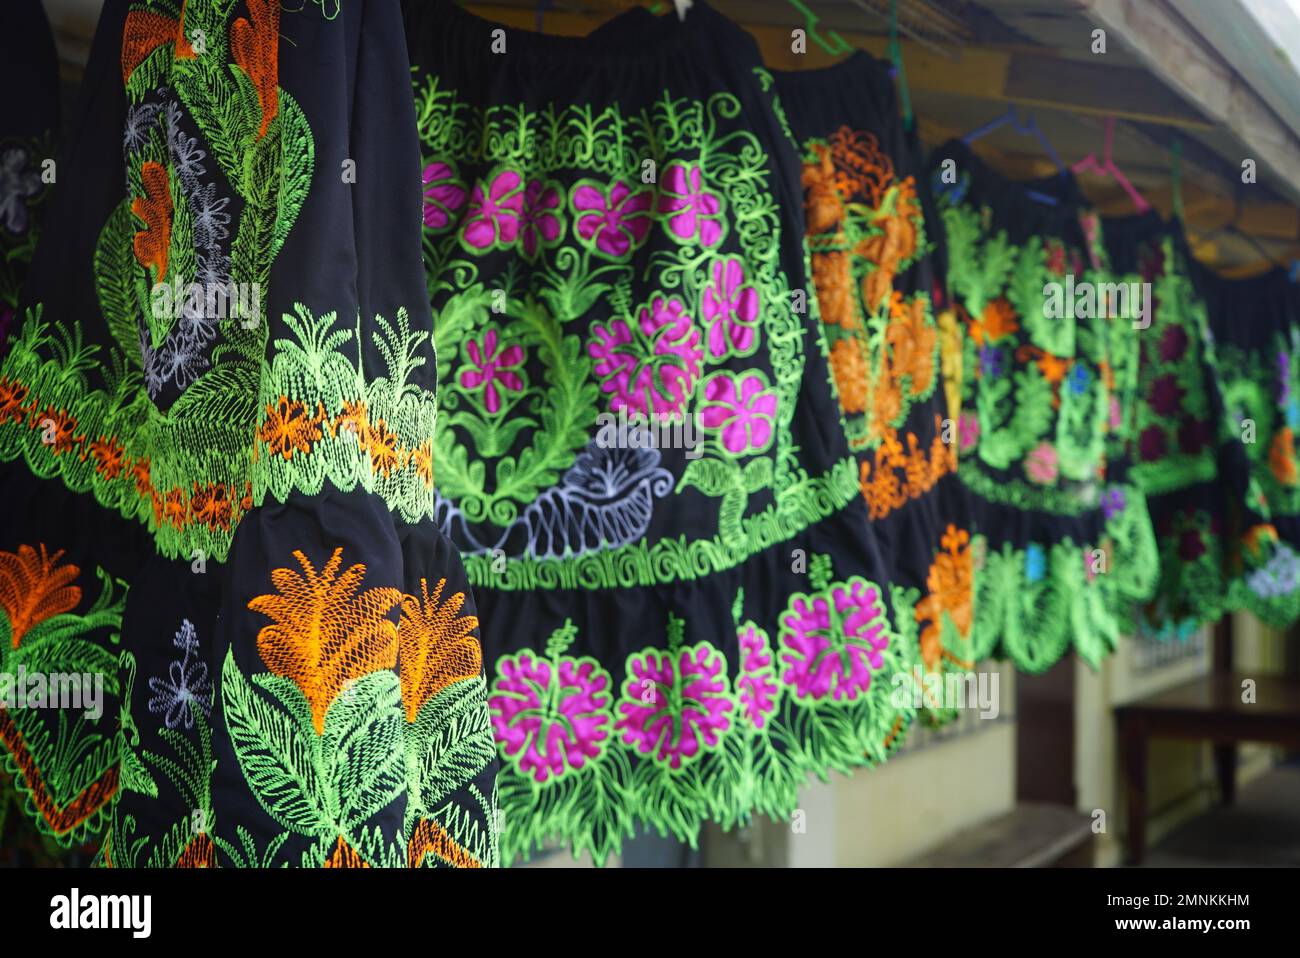 This Oct. 26, 2017 photo shows colorful floral skirts for sale in Pohnpei's  capital city of Kolonia in Micronesia. The skirts are a fashion staple  throughout the island. (AP Photo/Nicole Evatt Stock